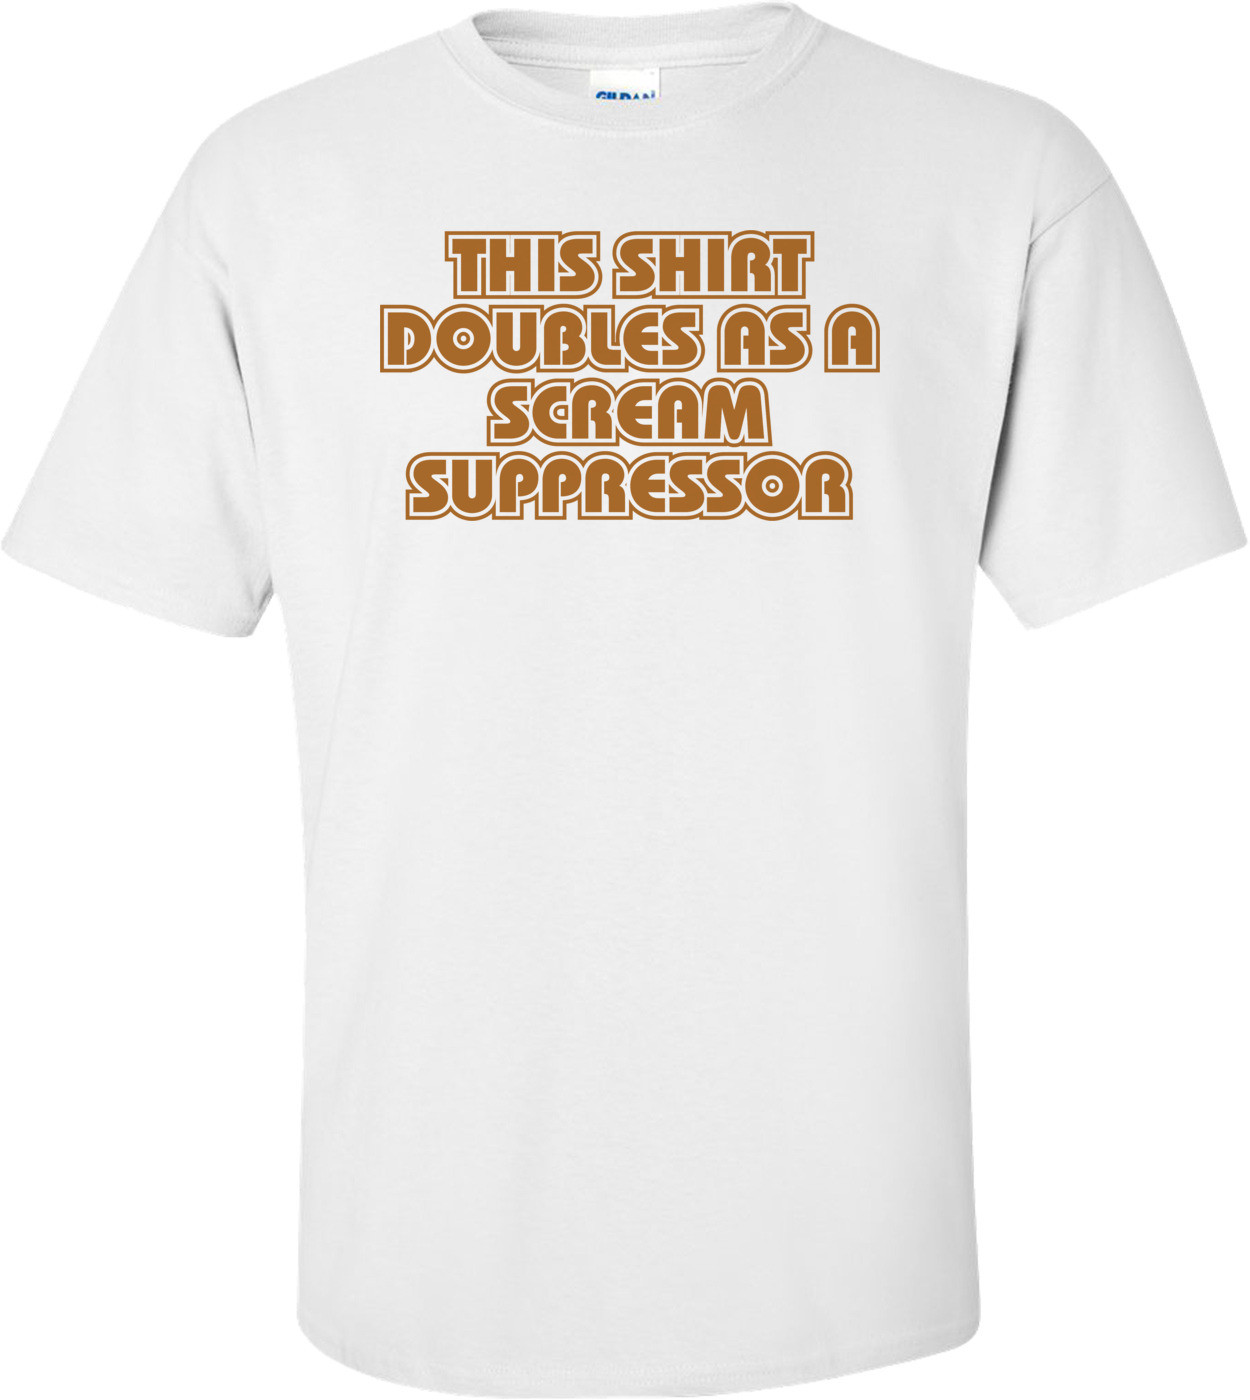 This Shirt Also Doubles As A Scream Suppressor T-shirt